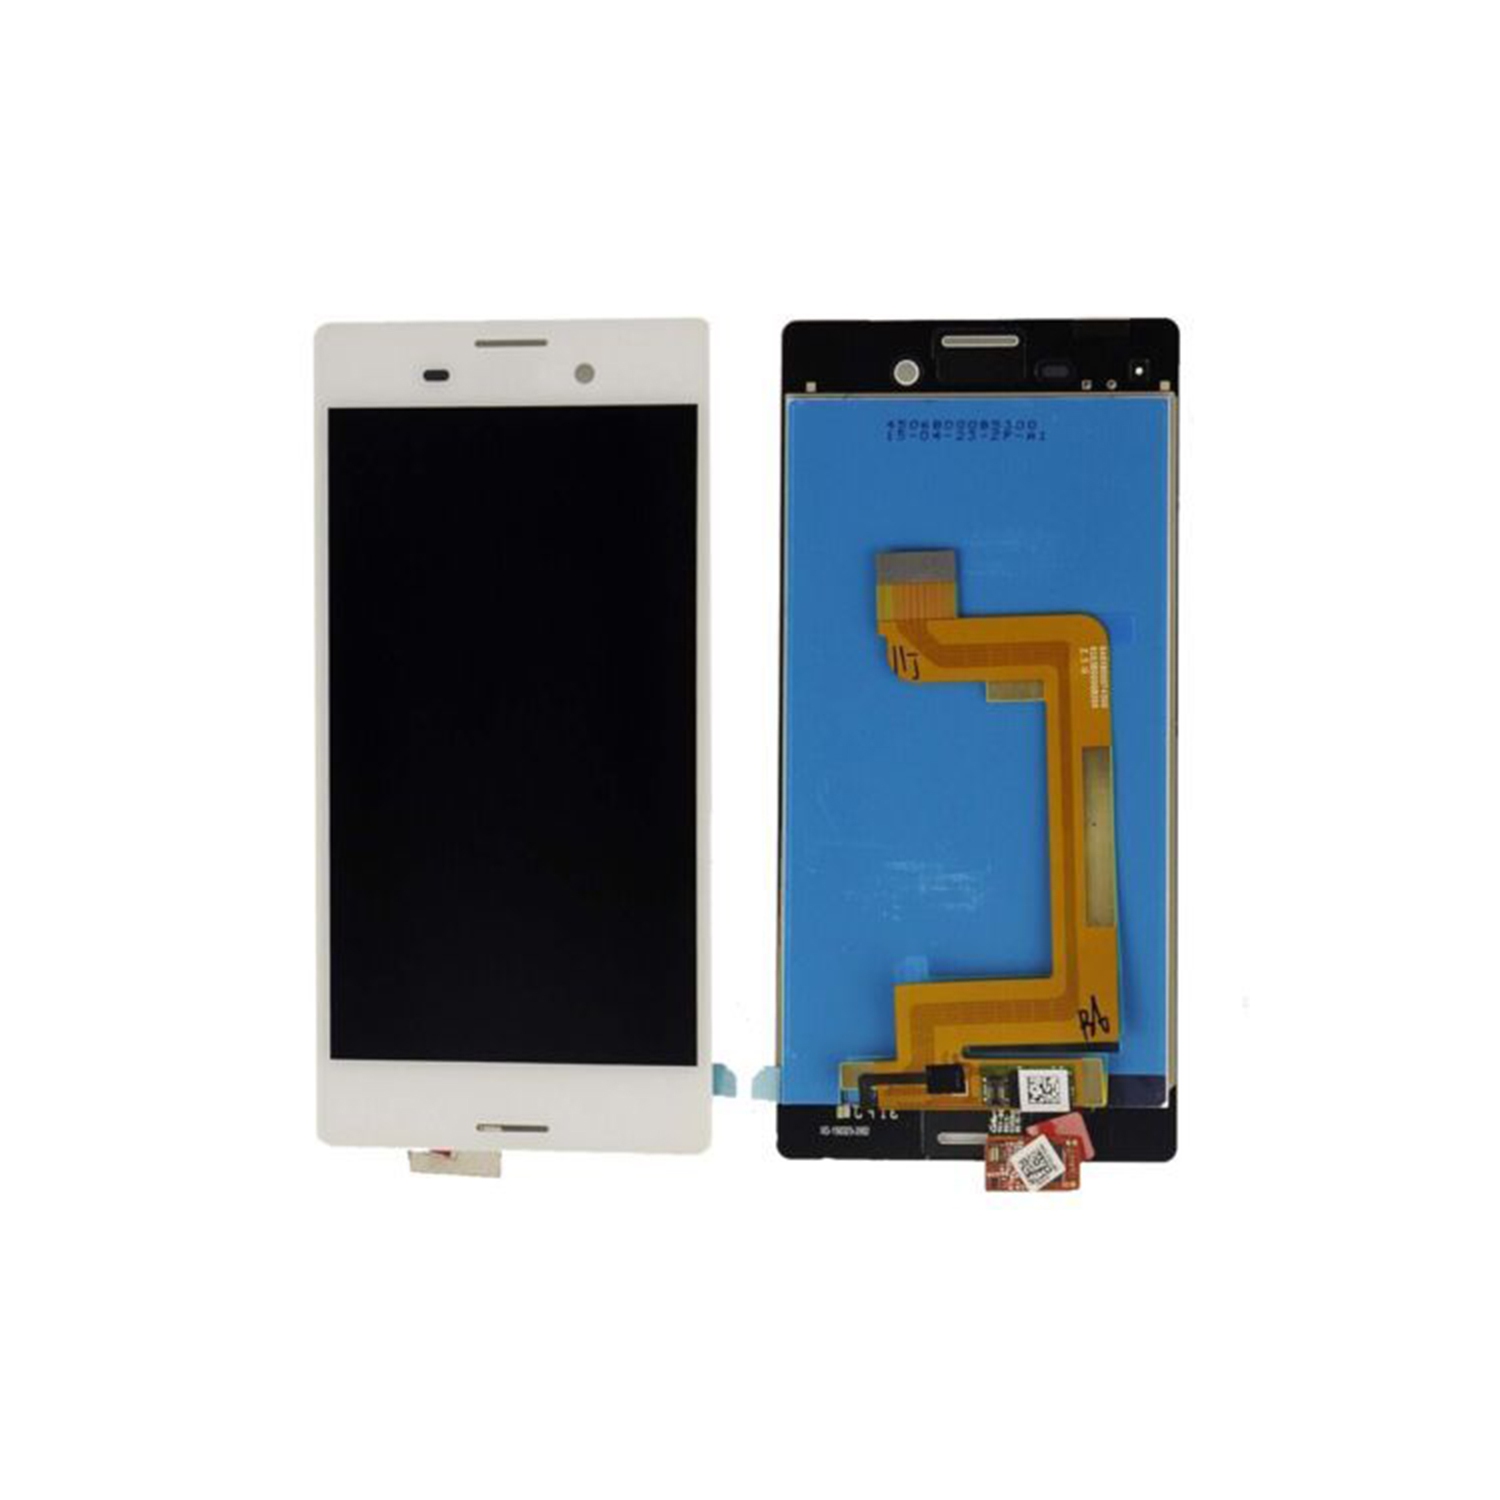 Sony Xperia M4 Aqua LCD Display + Touch Screen Digitizer Assembly Replacement - White